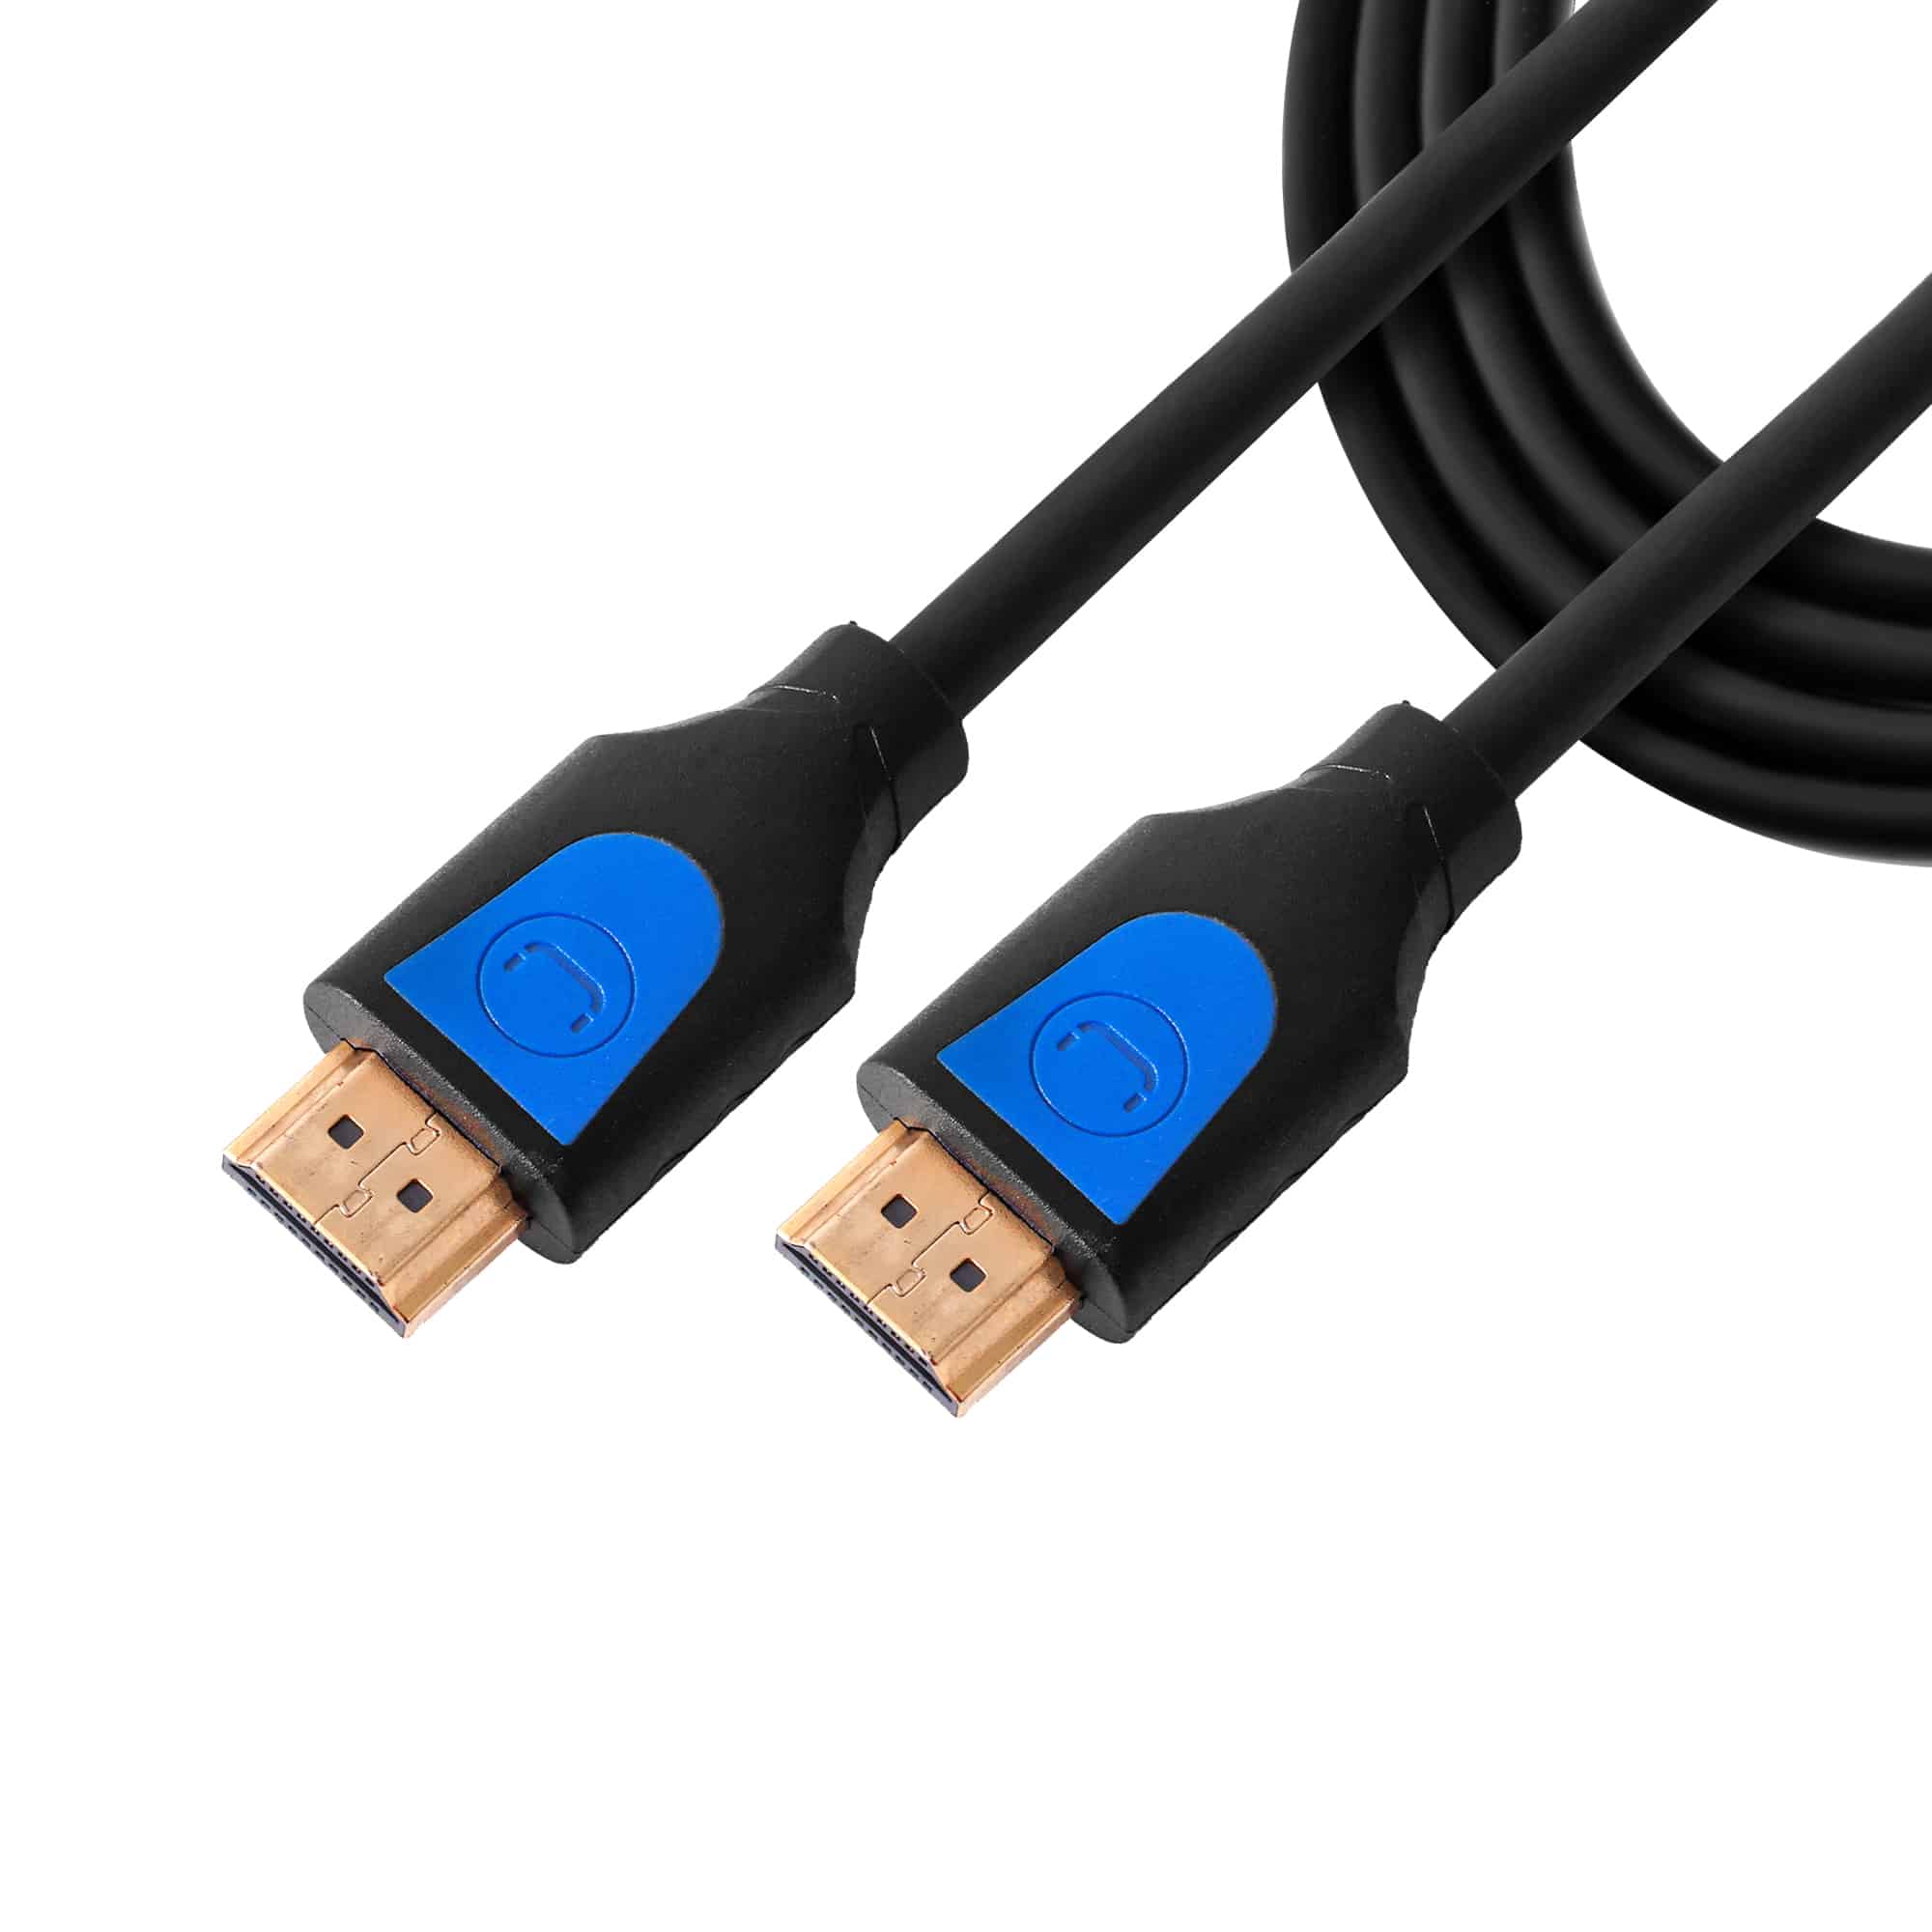 HDMI 2.0 CABLE, 6FTCB4226BL